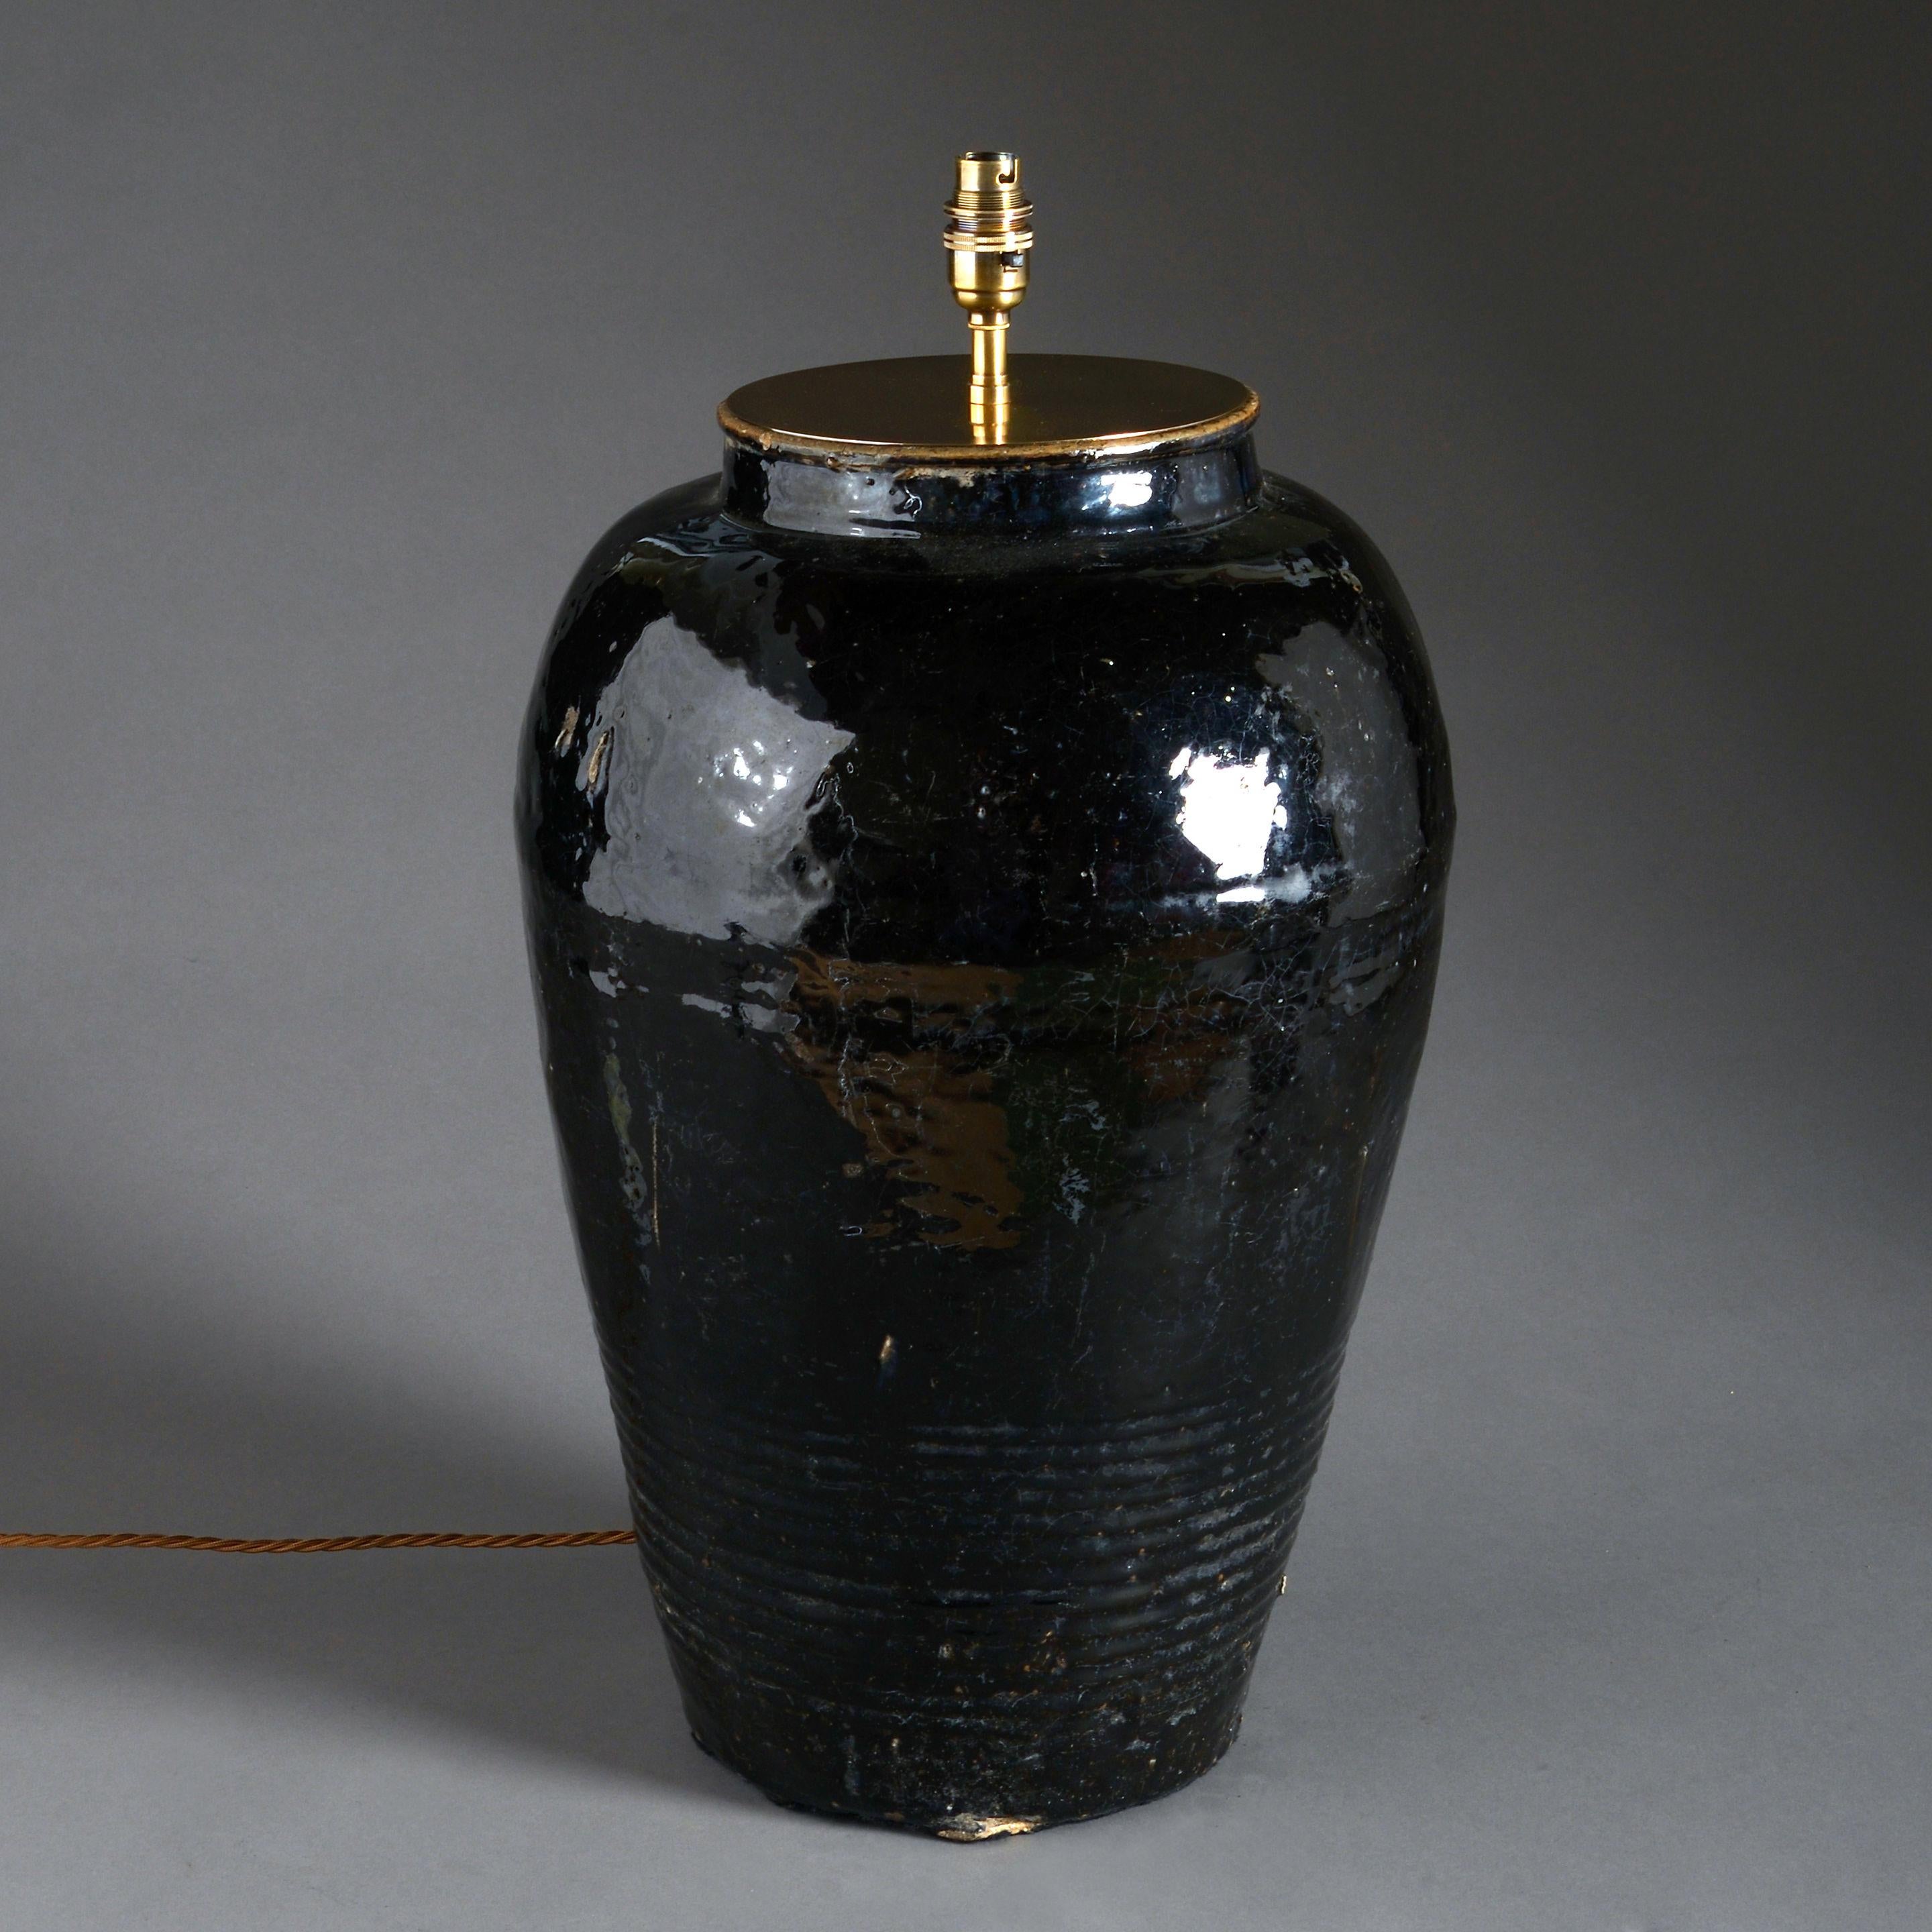 A large pair of black glazed Jars, having turned decoration of rings to the lower body. 

Now mounted as table lamps. Dimensions refer to the height and width of the vases (not including shades).